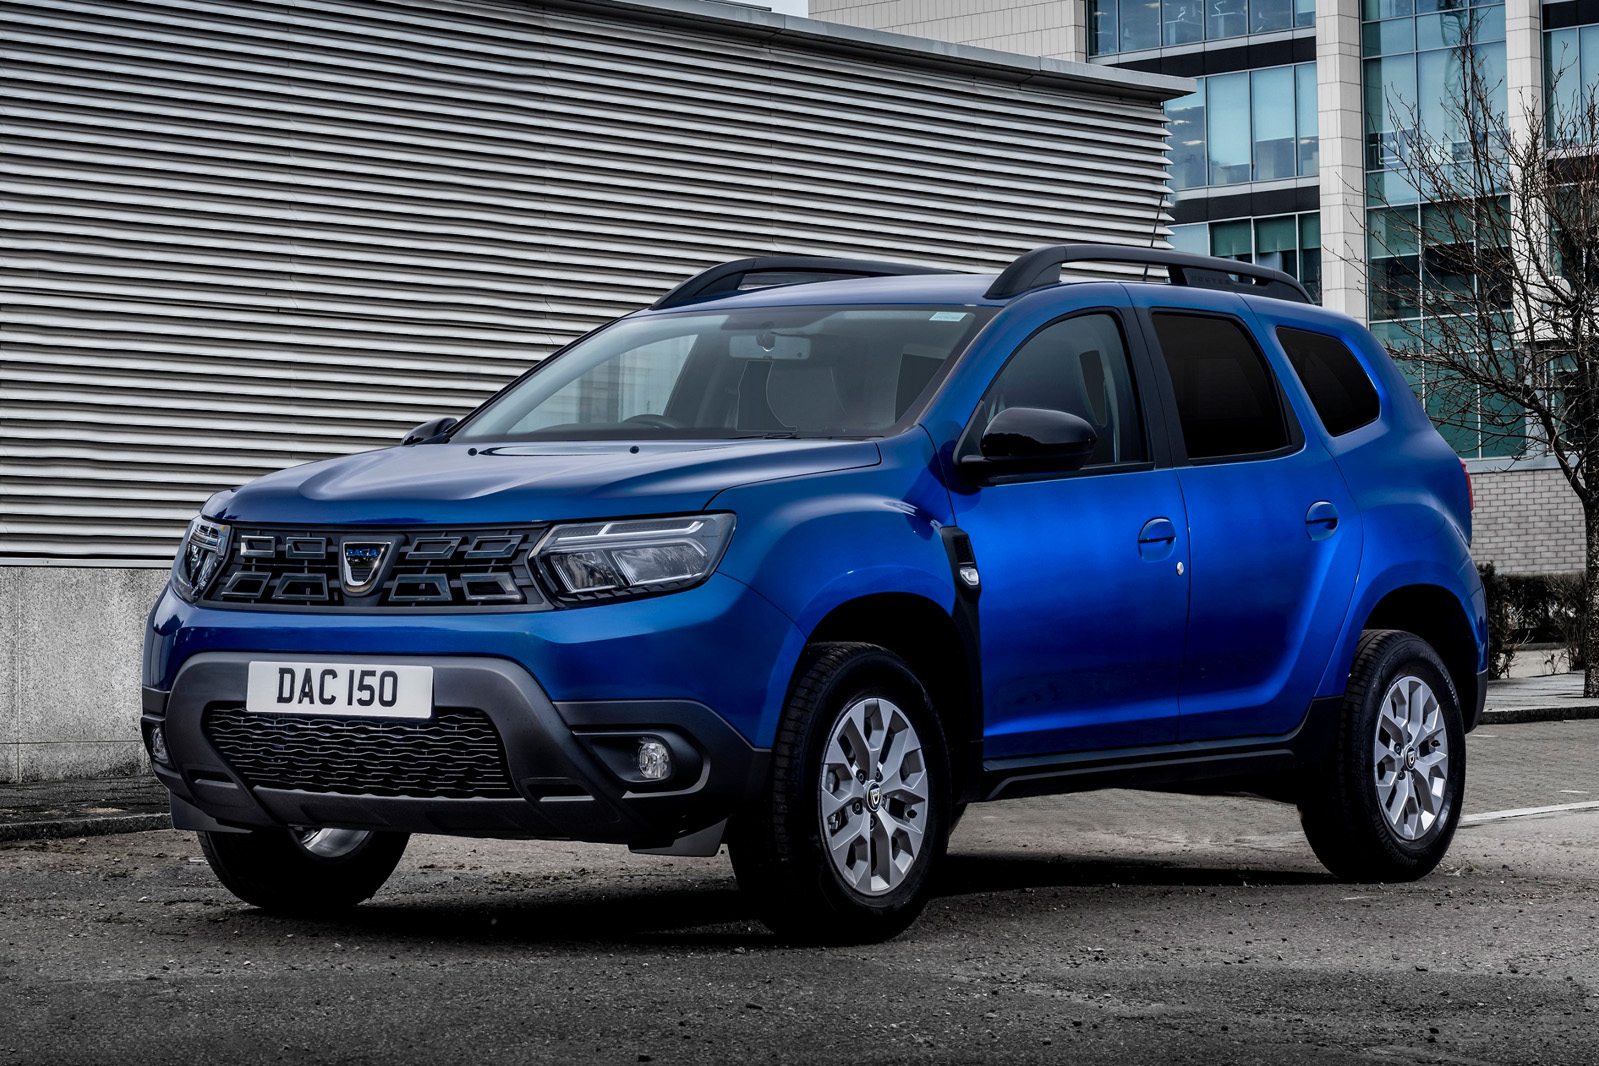 2021 Dacia Duster sale from £12,795 |